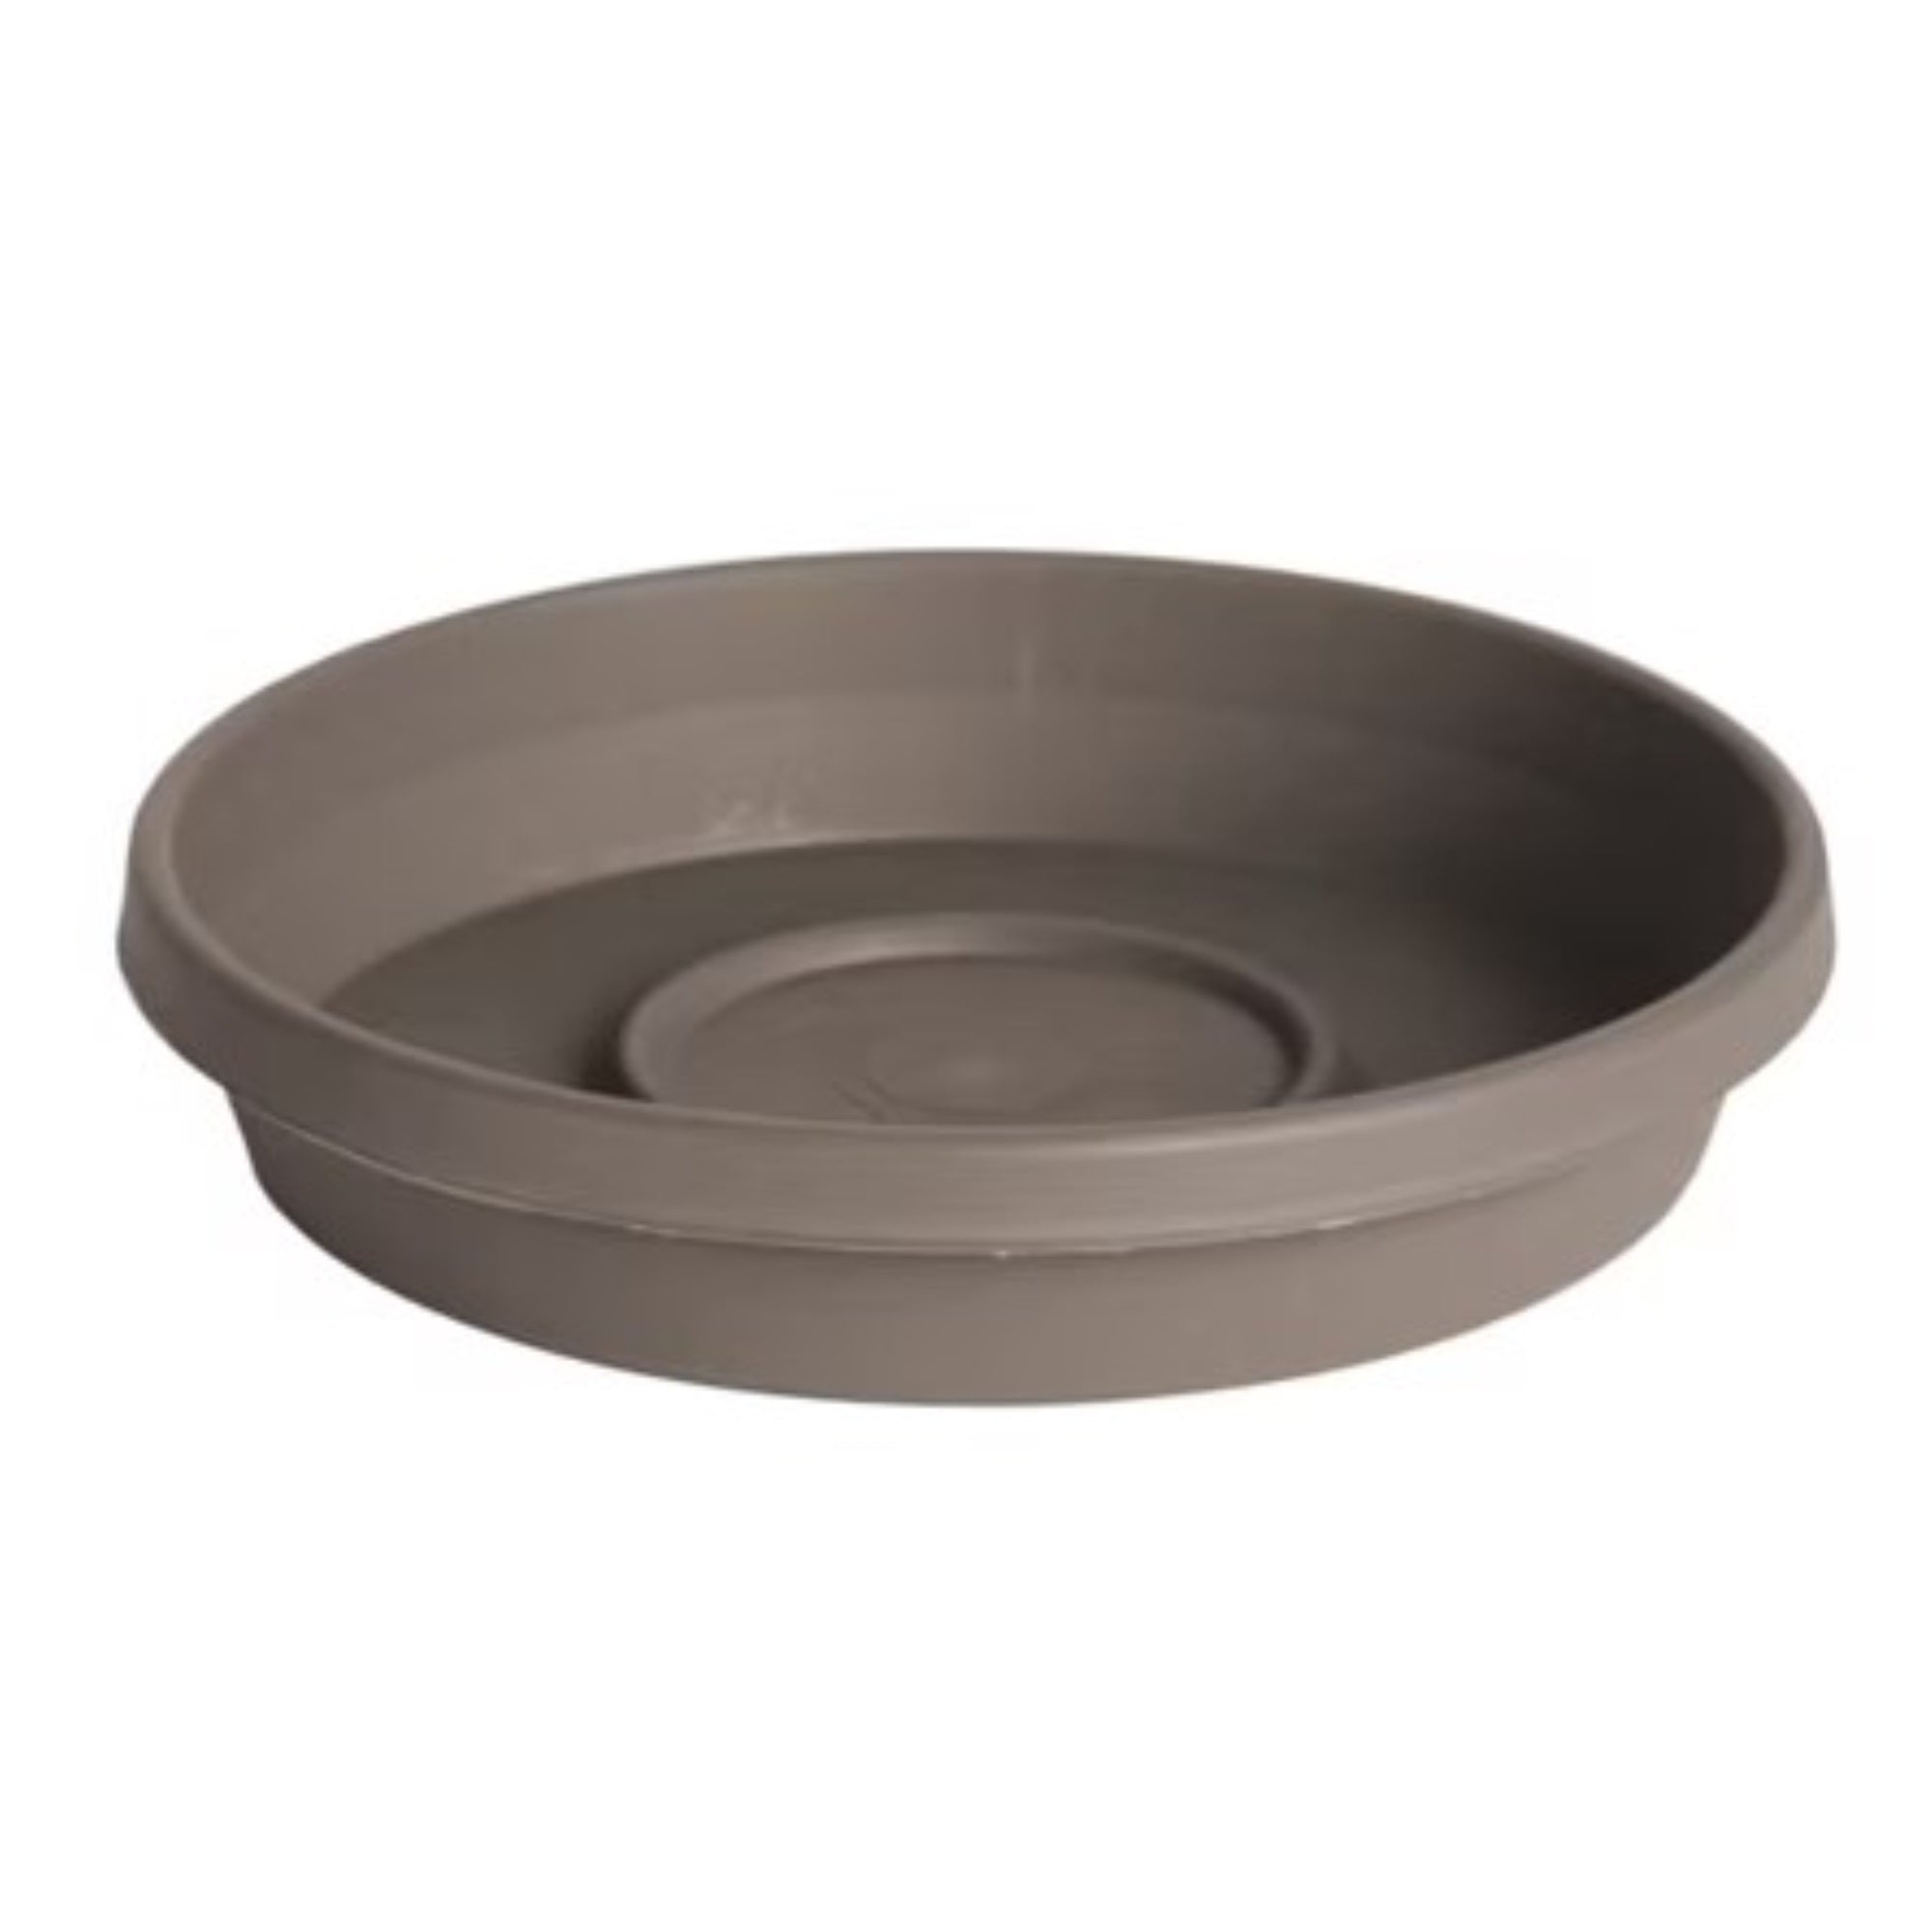 Bloem Terra Indoor/Outdoor Round Plastic Saucer Tray for Planters and Pots